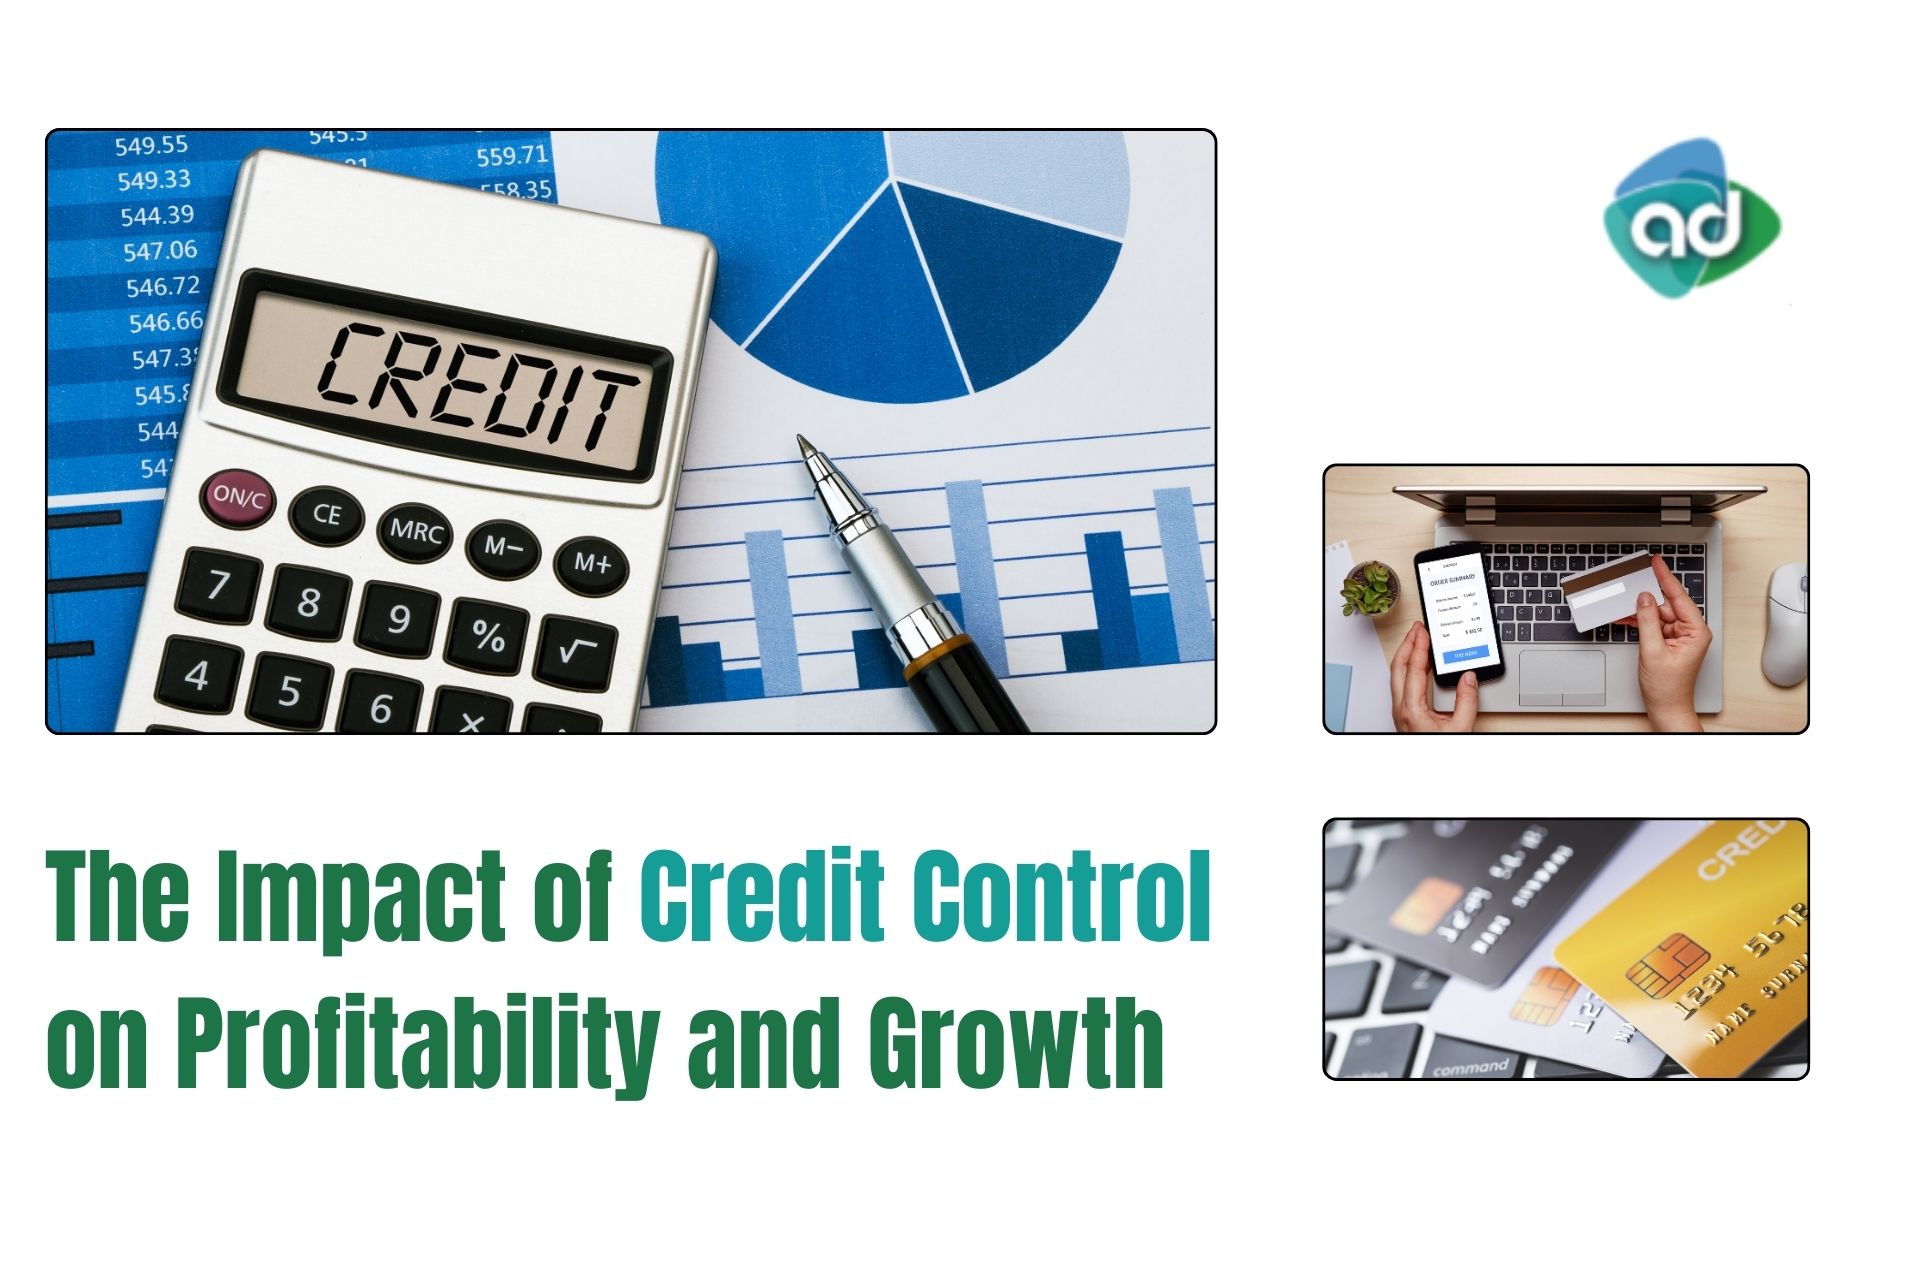 The Impact of Credit Control on Profitability and Growth